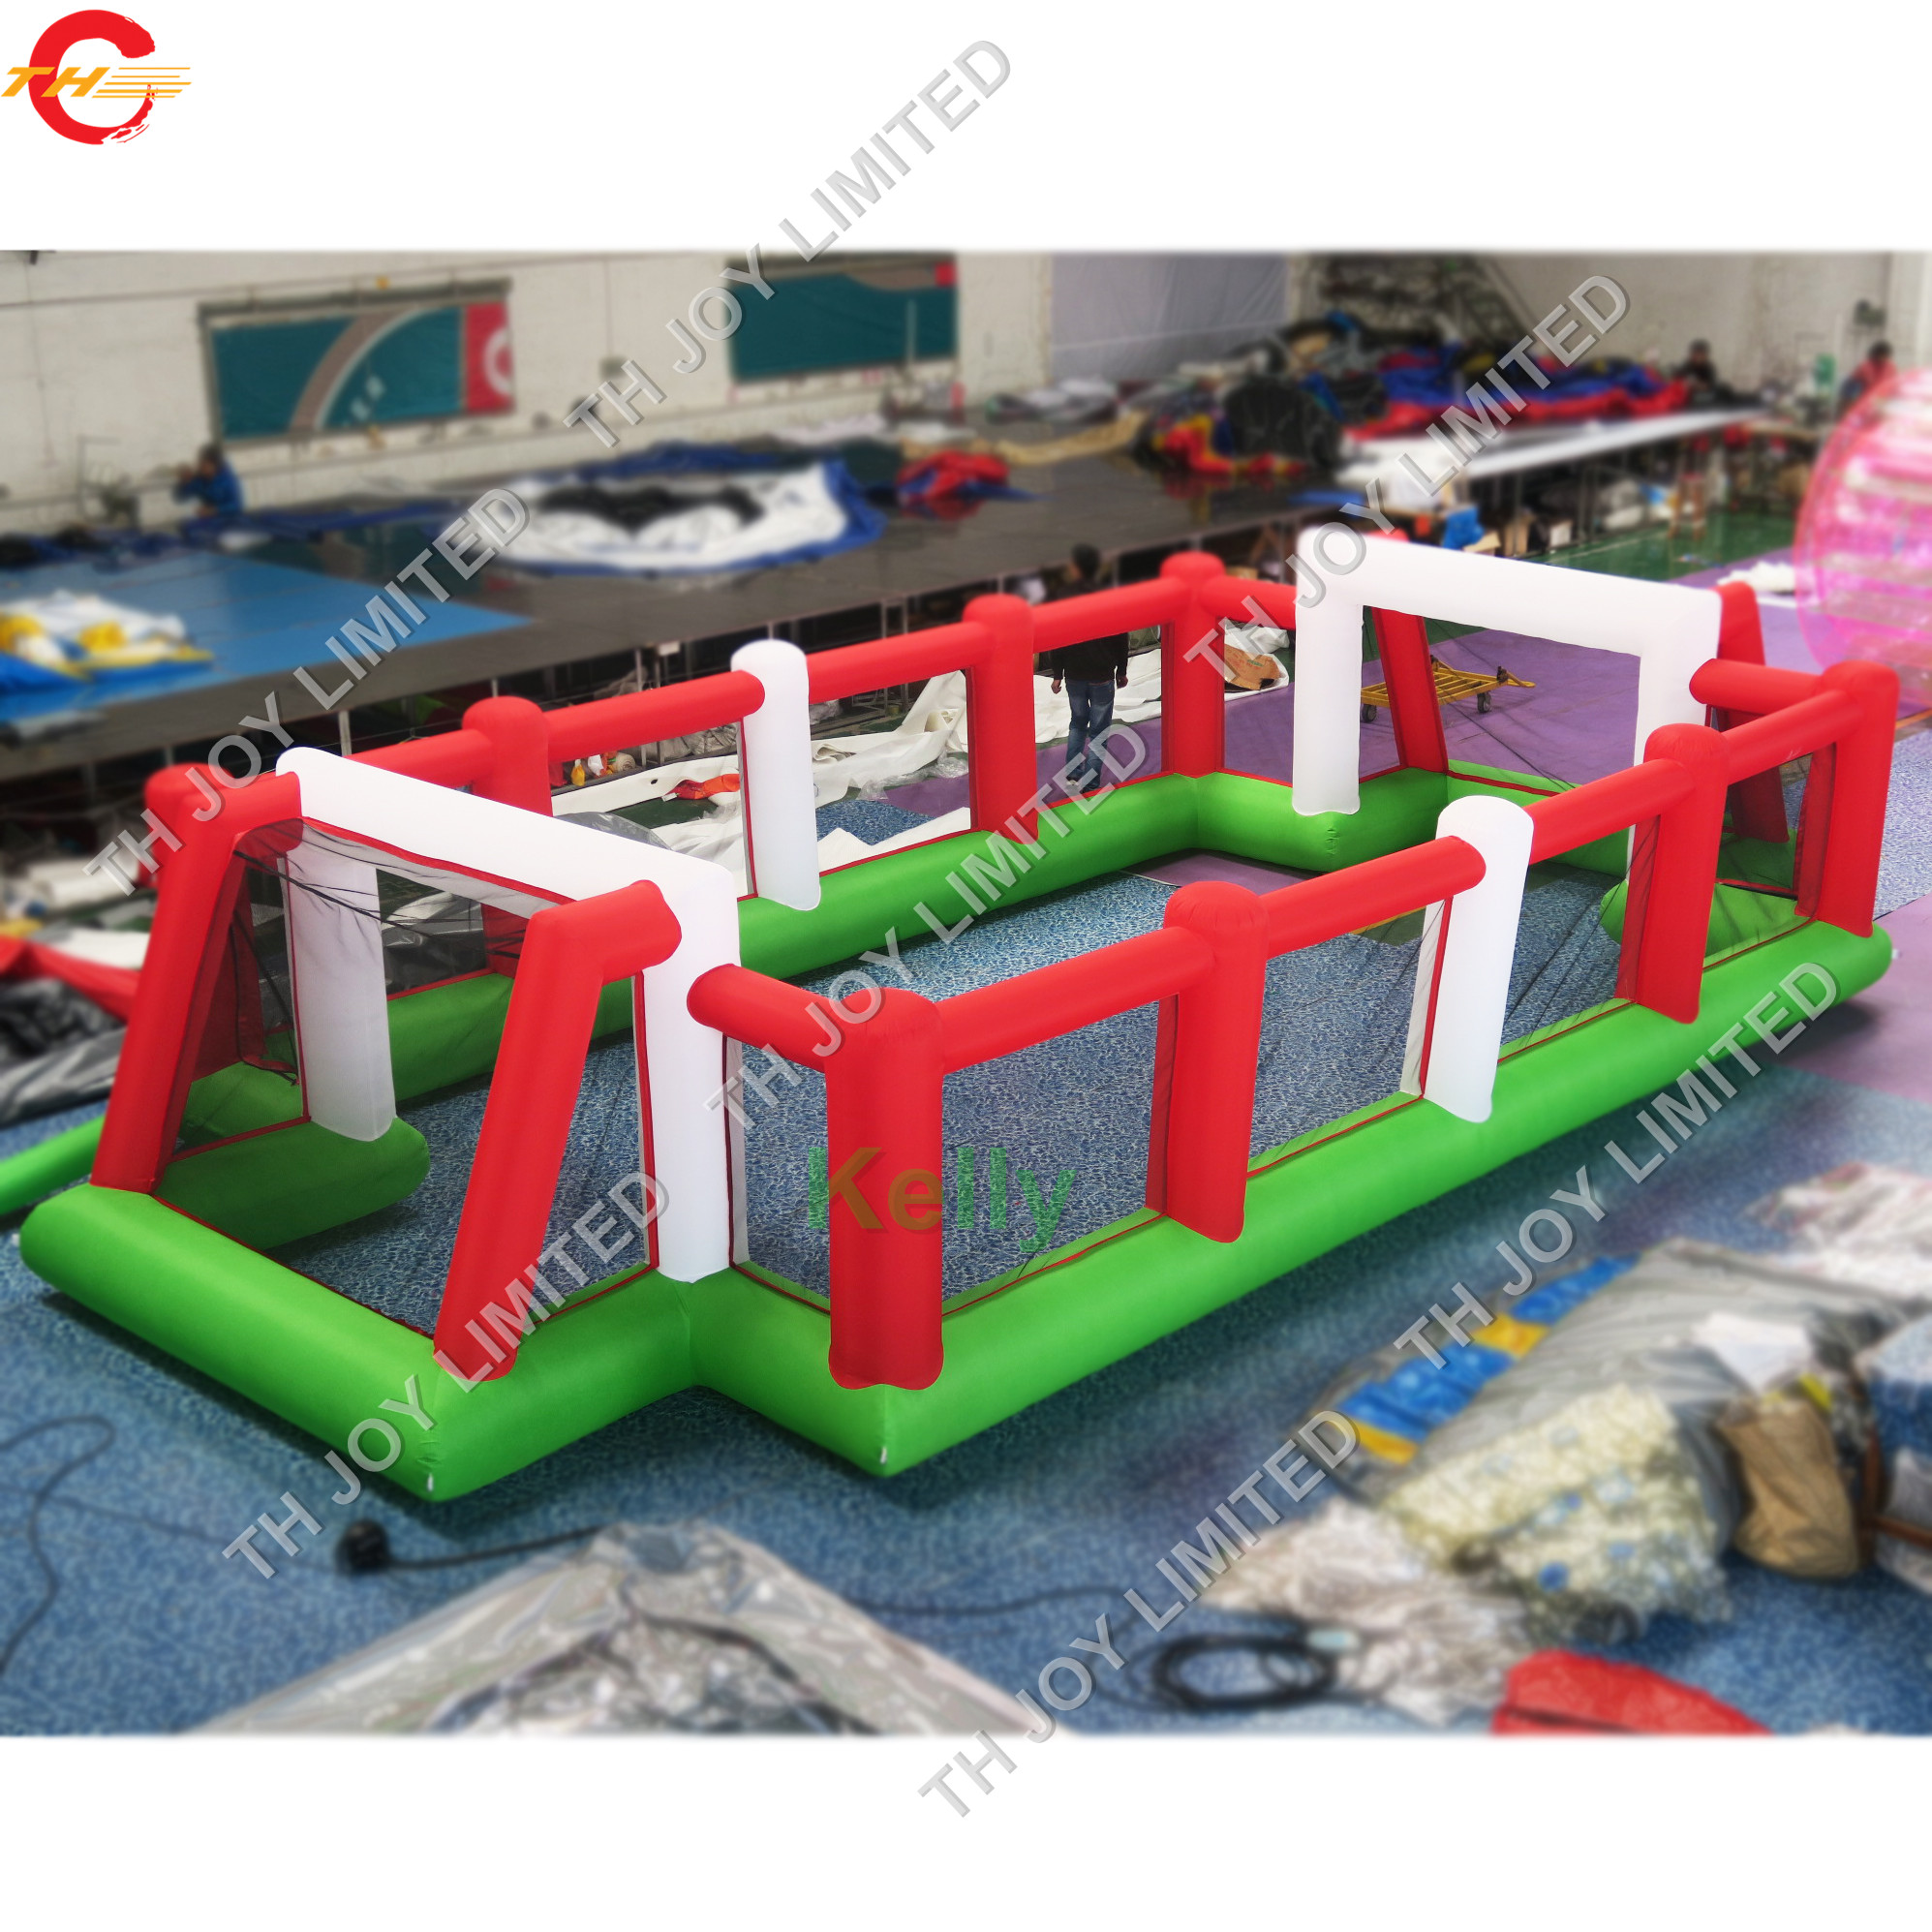 

China factory price cheap Inflatable soccer field, Inflatable football Pitch, inflatable football Court Arena sport games for kids and adult